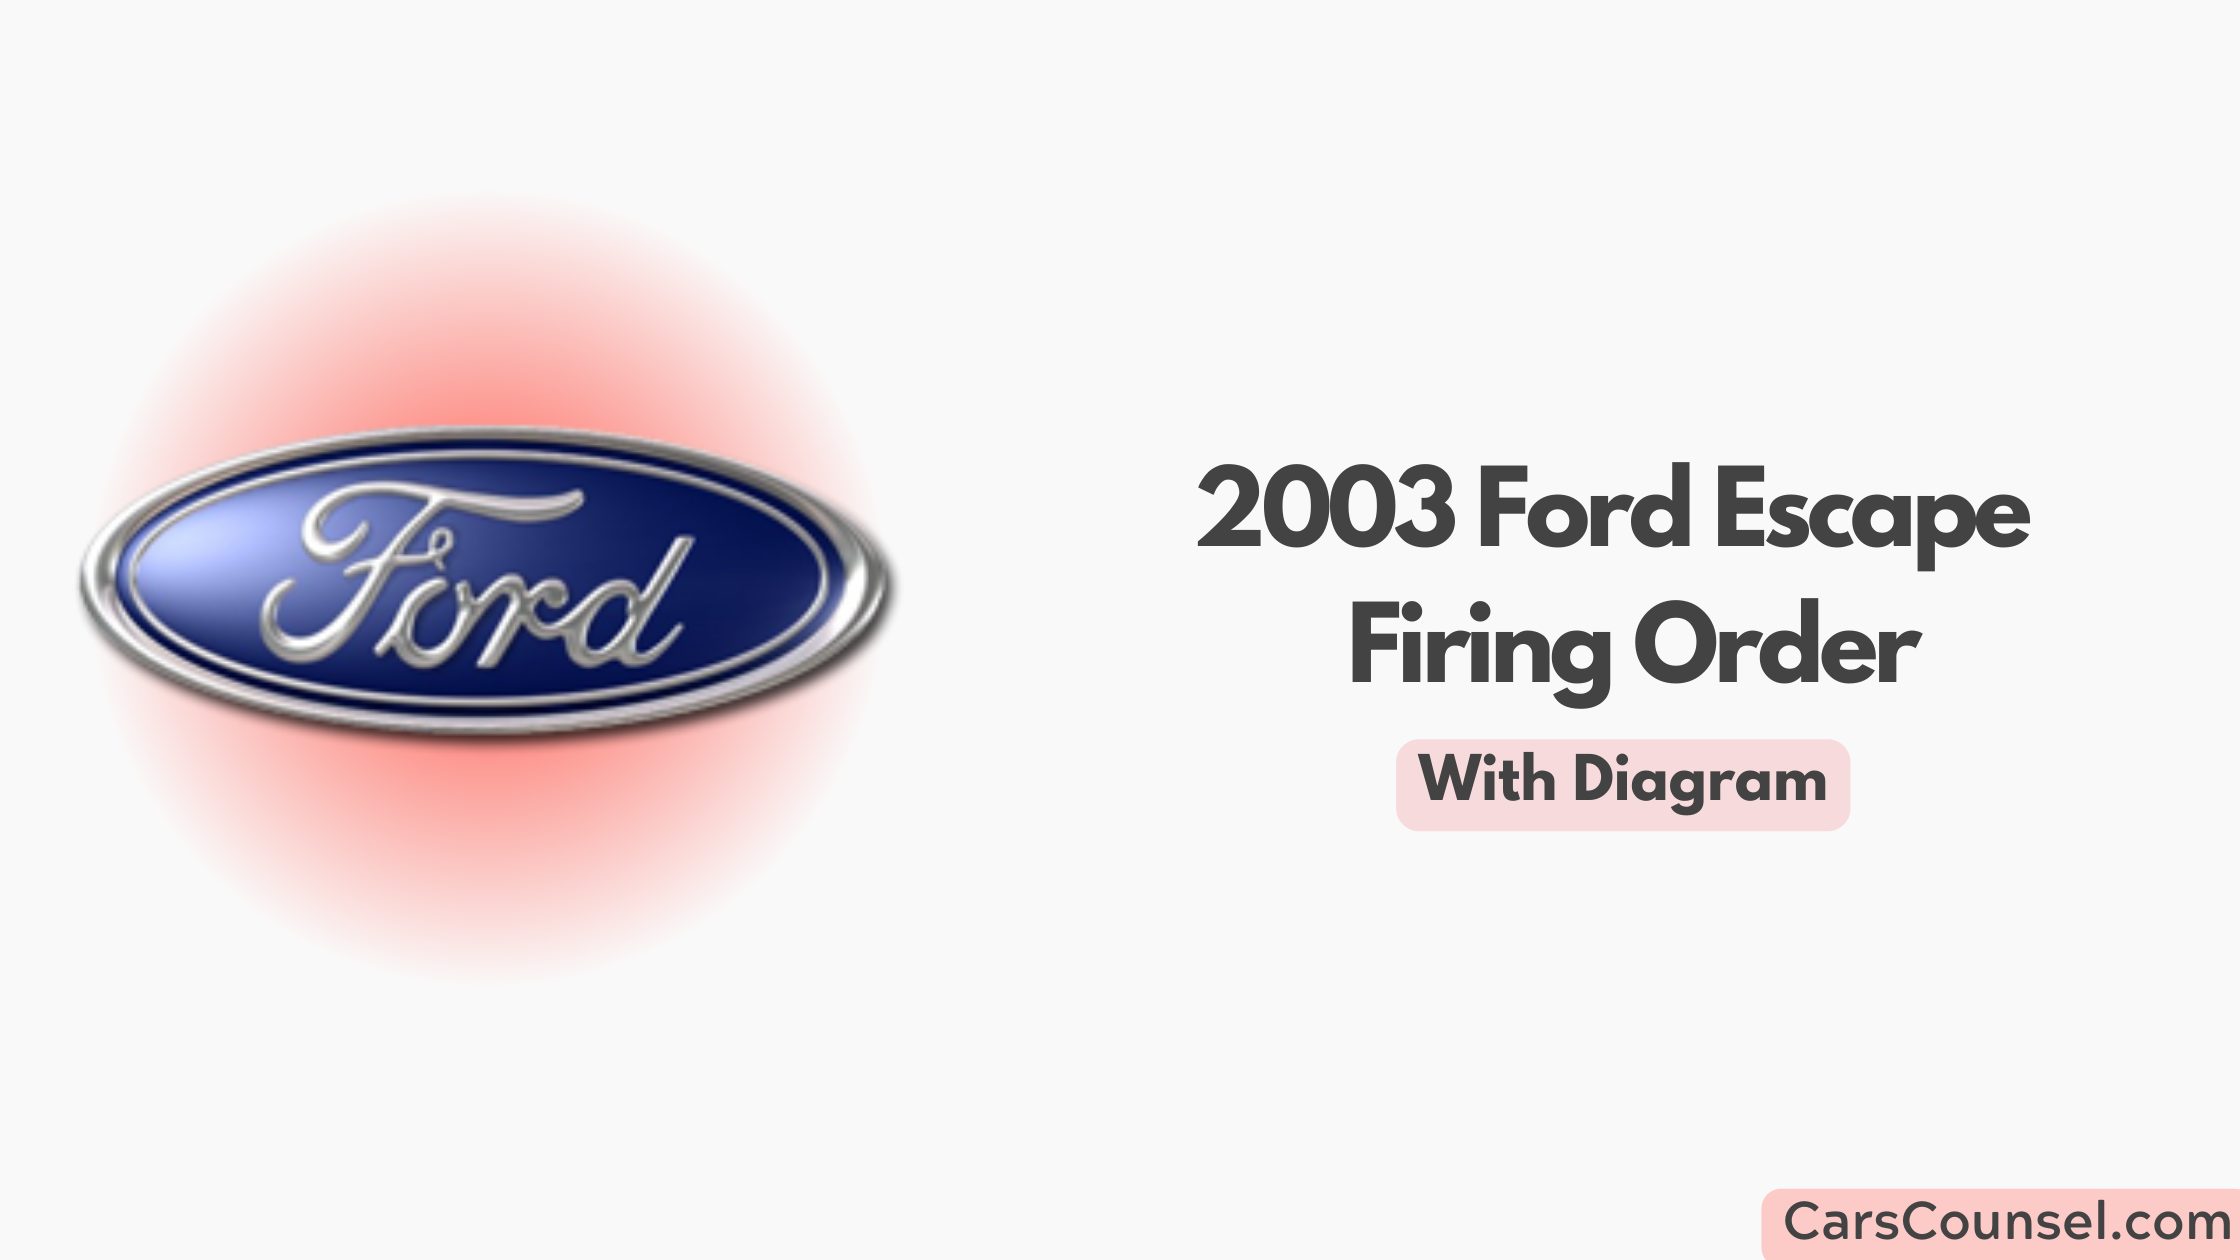 2003 Ford Escape Firing Order With Diagram